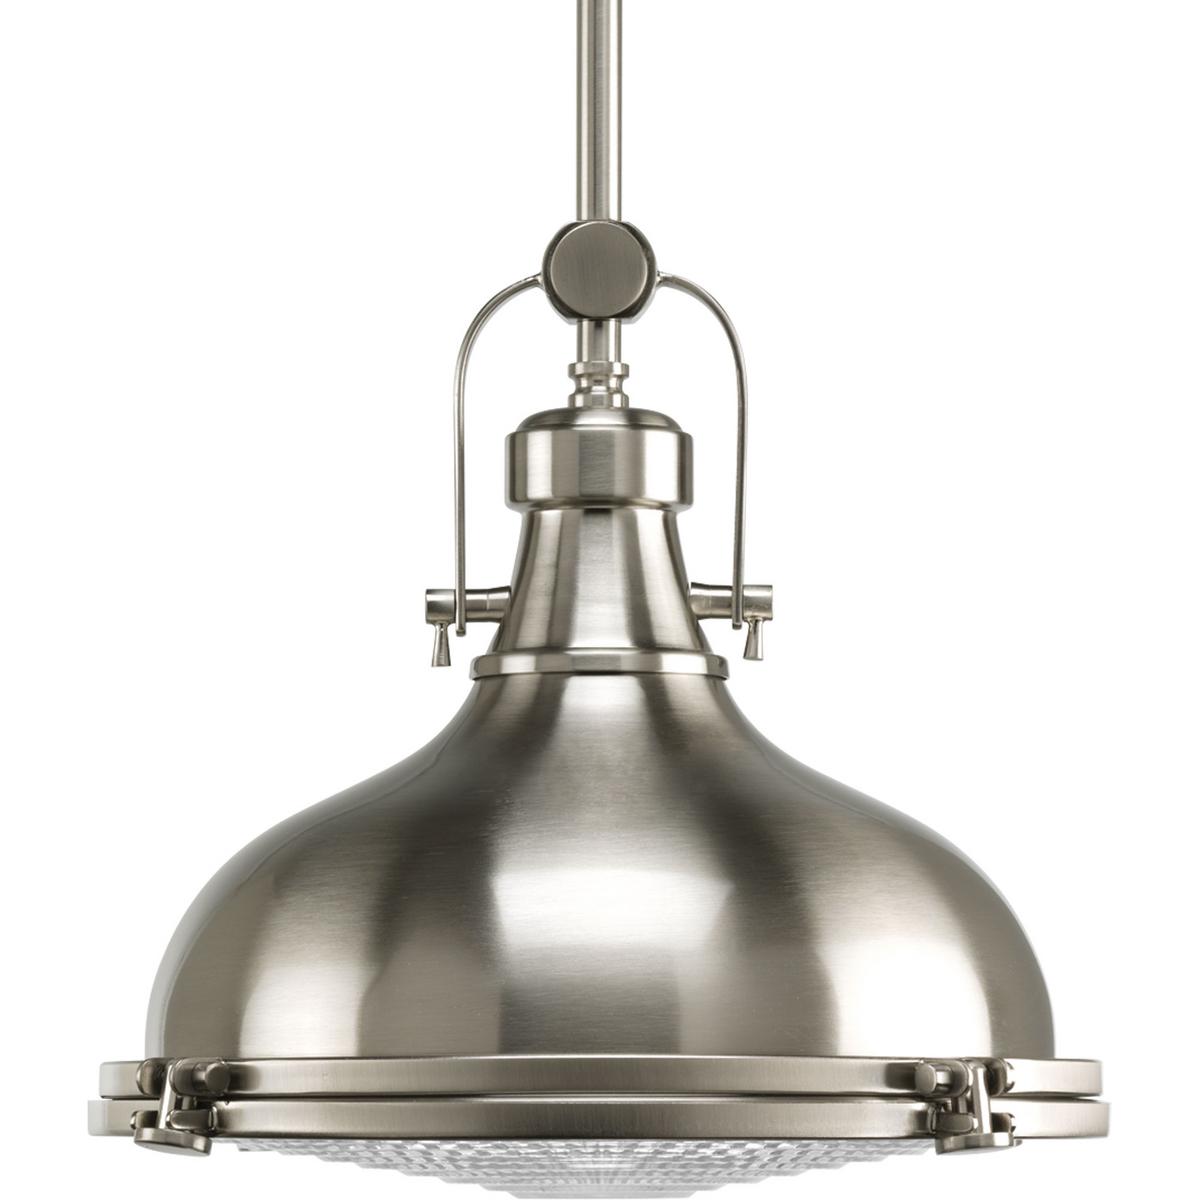 Hubbell P5188-0930K9 The one-light 12" pendant features industrial roots in both form and function. The Oil Brushed Nickel finish highlight the high-quality prismatic glass which adds to the historical aesthetic. Antique style fixture includes a hinge-locking nautical design.